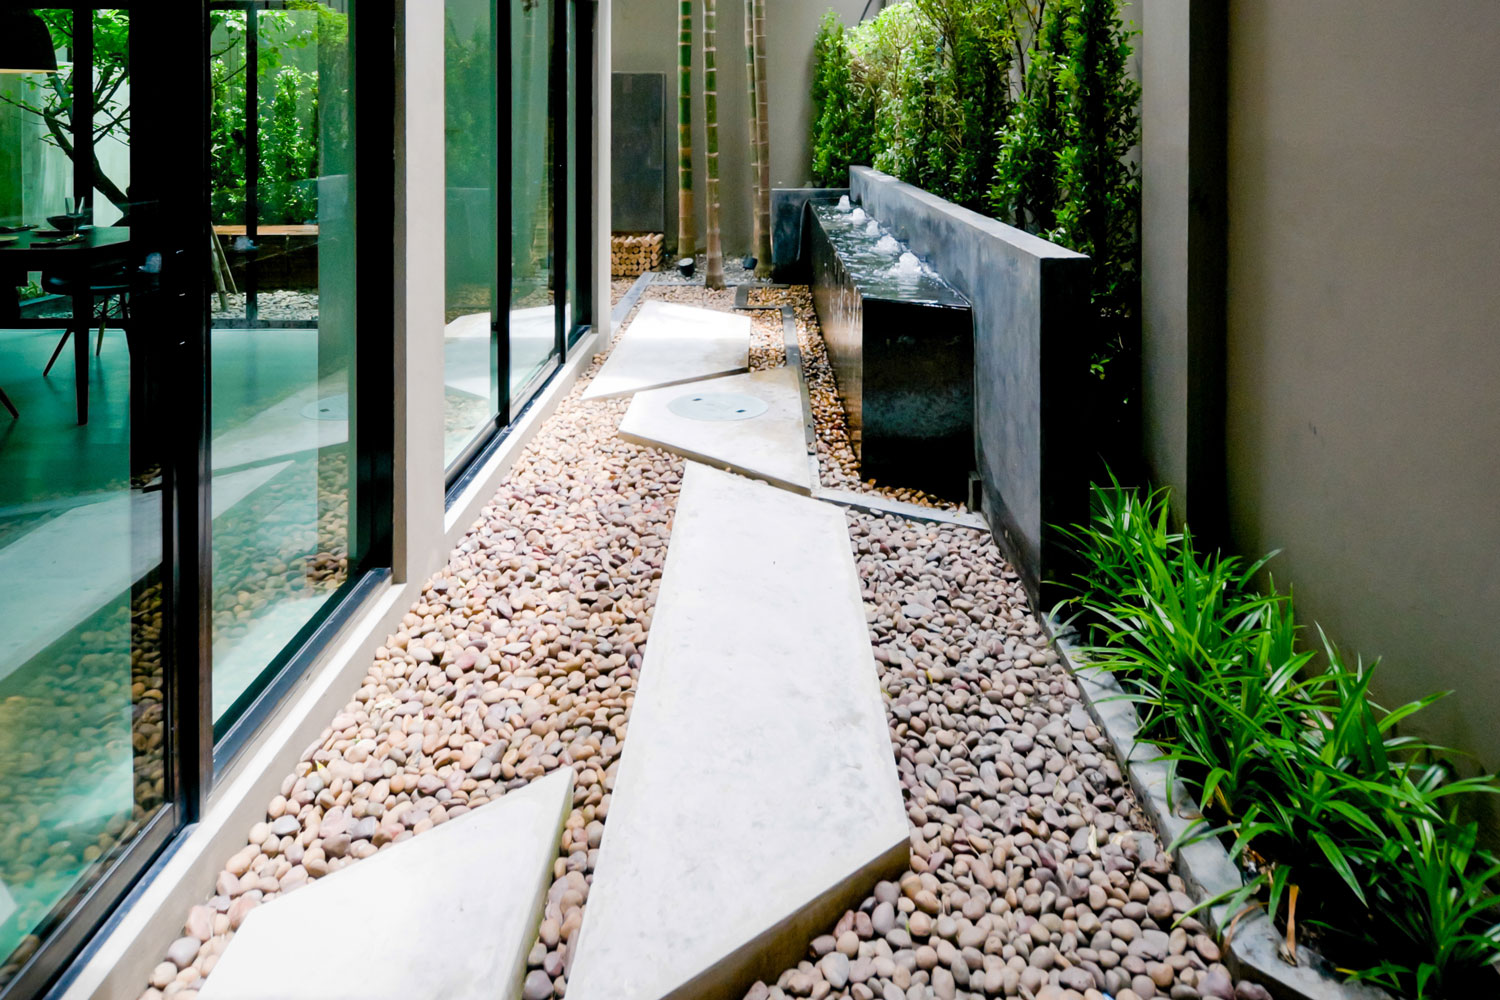 Pebble stones for a decorative pathway